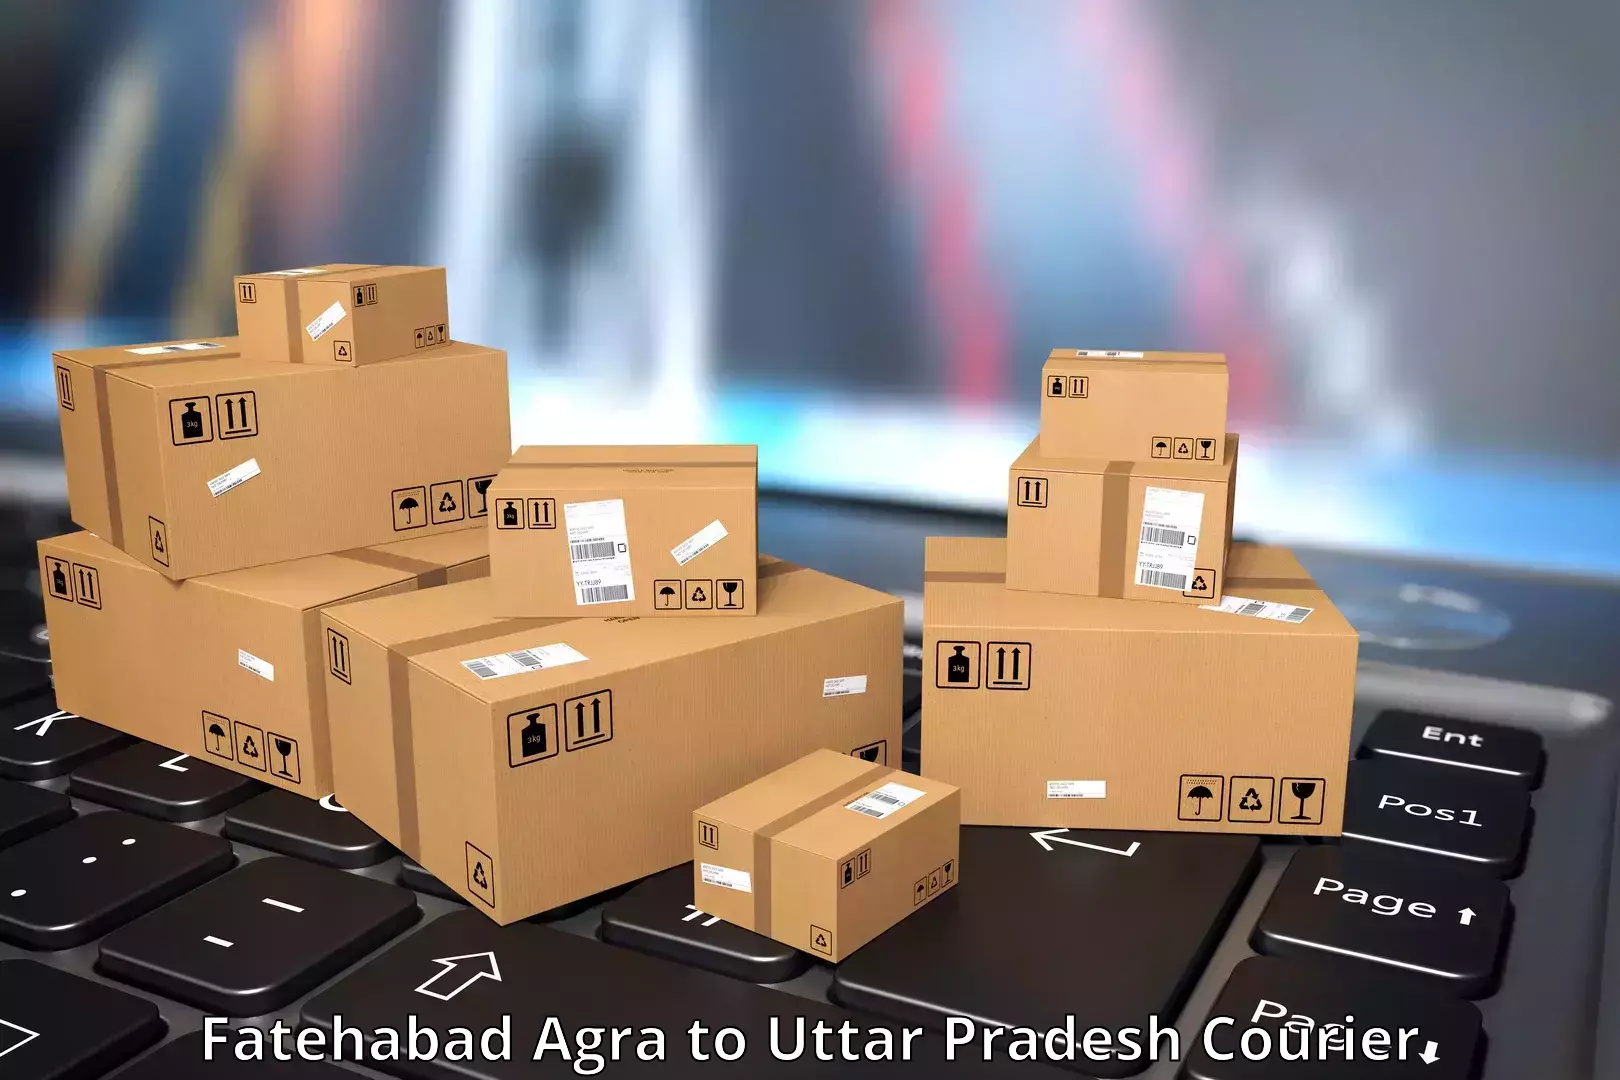 Express delivery capabilities Fatehabad Agra to Salemgarh